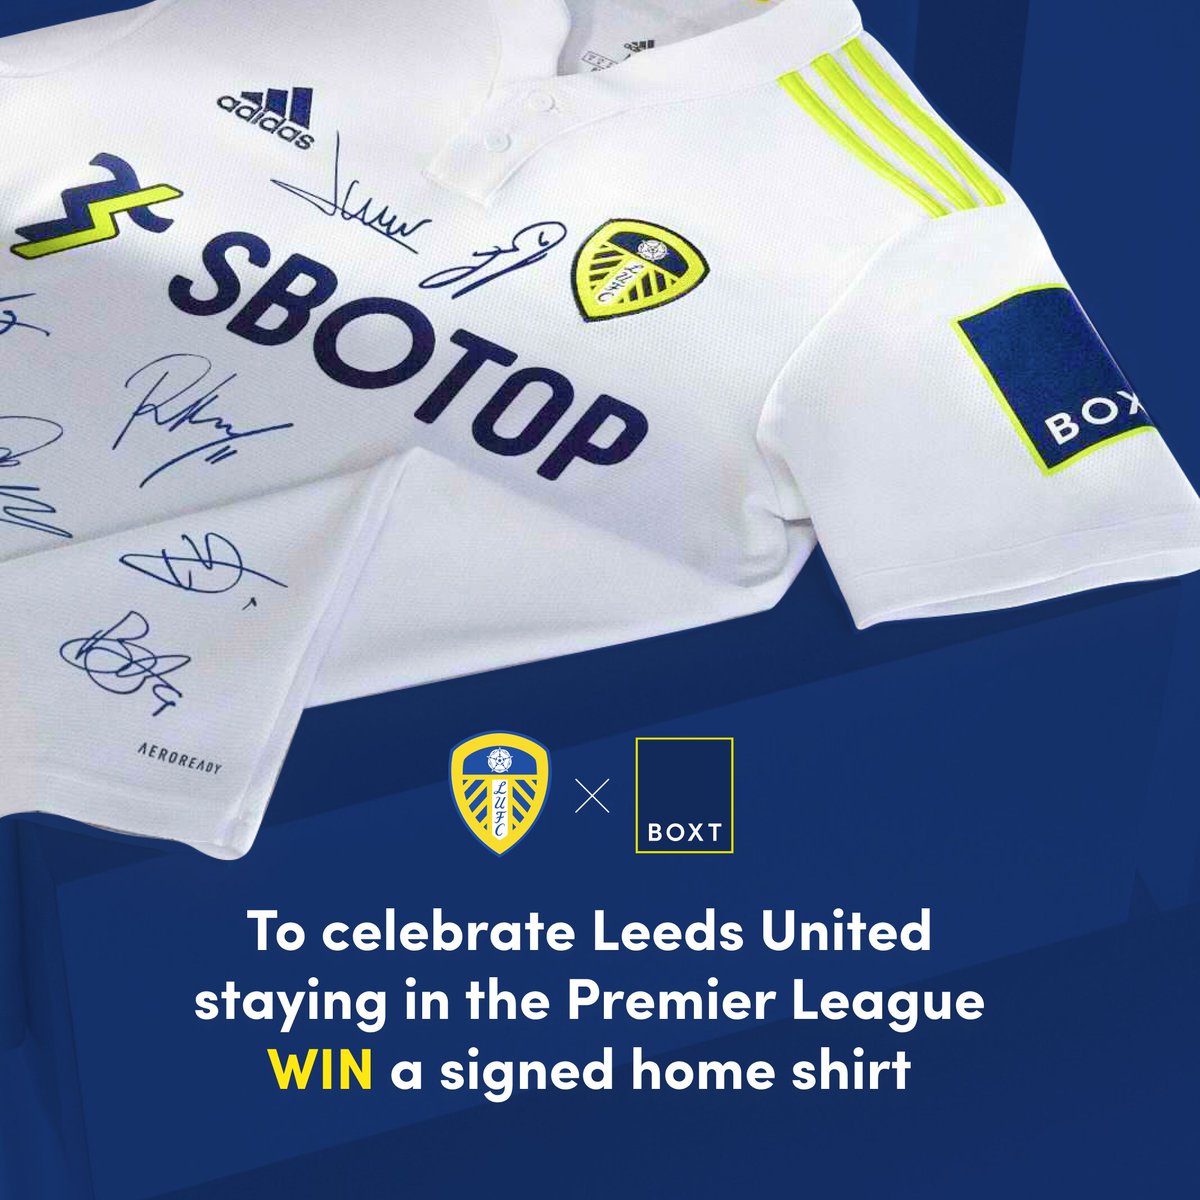 🚨 COMPETITION TIME 🚨 In celebration of @LUFC staying in the Premier League, we're giving you the chance to win a SIGNED home shirt! To enter: ✅ Make sure you're following @weareboxt ✅ Retweet this post ✅ Tag a friend below T&Cs apply. Competition ends 31/5/22 #ALAW